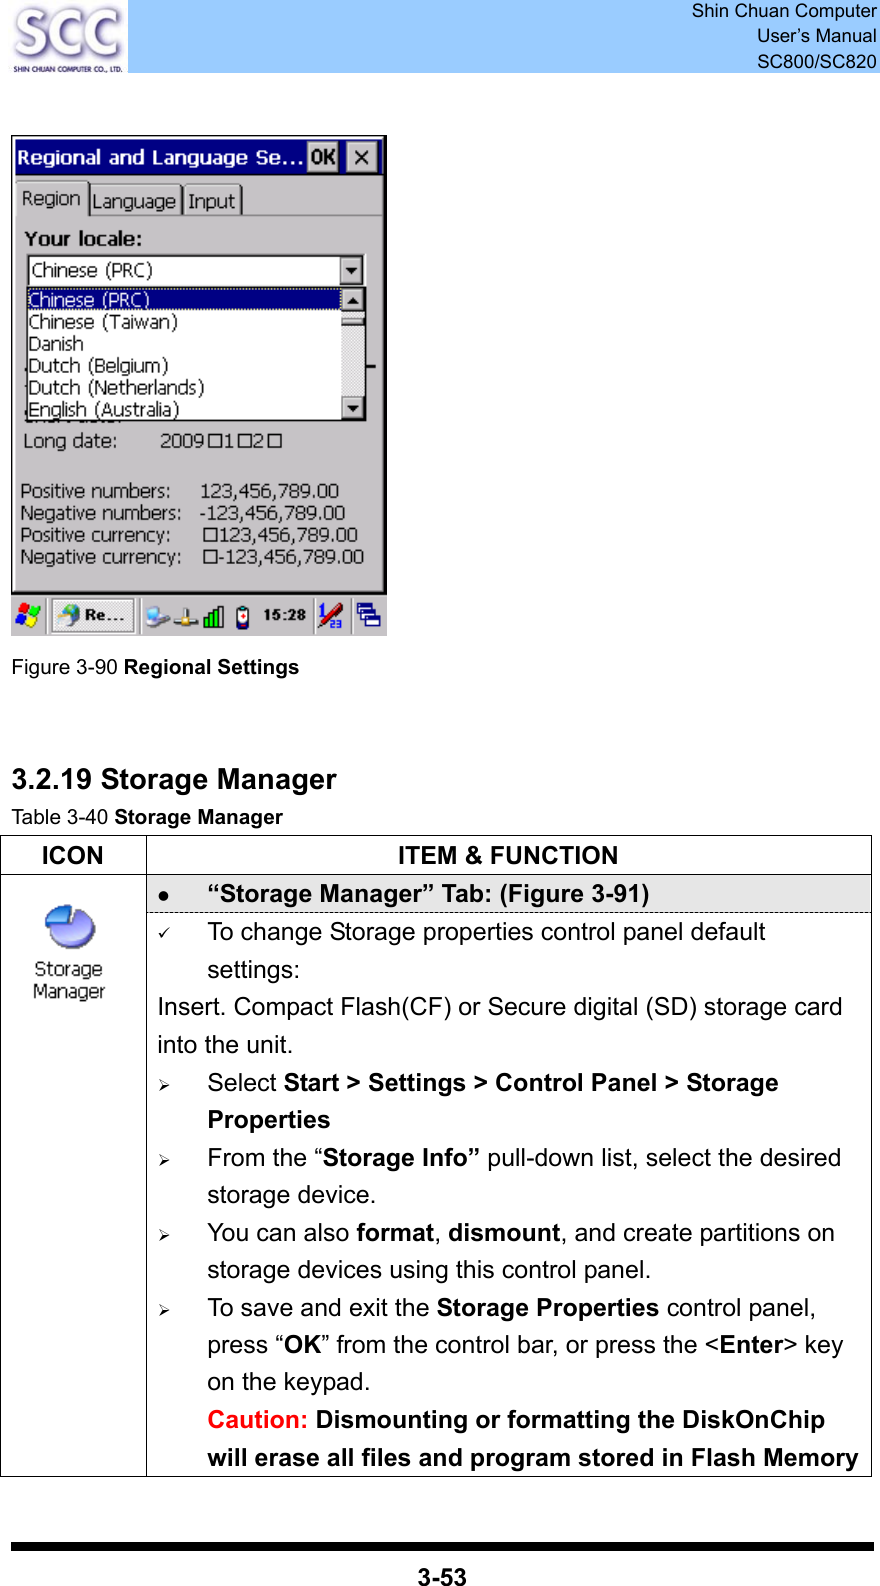  Shin Chuan Computer User’s Manual SC800/SC820  3-53   Figure 3-90 Regional Settings   3.2.19 Storage Manager Table 3-40 Storage Manager ICON  ITEM &amp; FUNCTION z “Storage Manager” Tab: (Figure 3-91)  9 To change Storage properties control panel default settings: Insert. Compact Flash(CF) or Secure digital (SD) storage card into the unit. ¾ Select Start &gt; Settings &gt; Control Panel &gt; Storage Properties ¾ From the “Storage Info” pull-down list, select the desired storage device. ¾ You can also format, dismount, and create partitions on storage devices using this control panel. ¾ To save and exit the Storage Properties control panel, press “OK” from the control bar, or press the &lt;Enter&gt; key on the keypad. Caution: Dismounting or formatting the DiskOnChip will erase all files and program stored in Flash Memory 